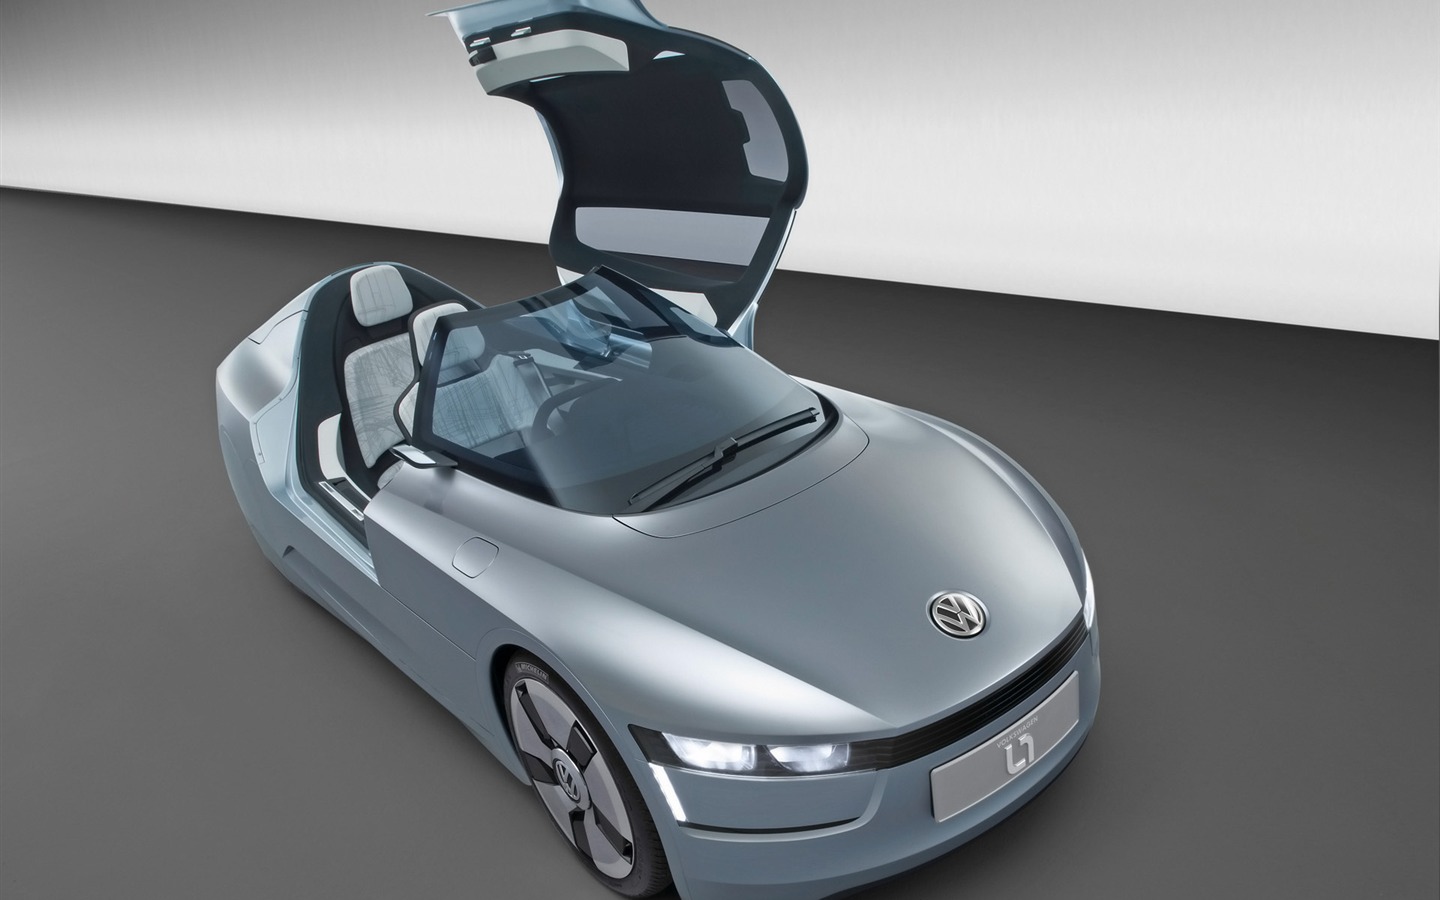 Volkswagen L1 Tapety Concept Car #22 - 1440x900